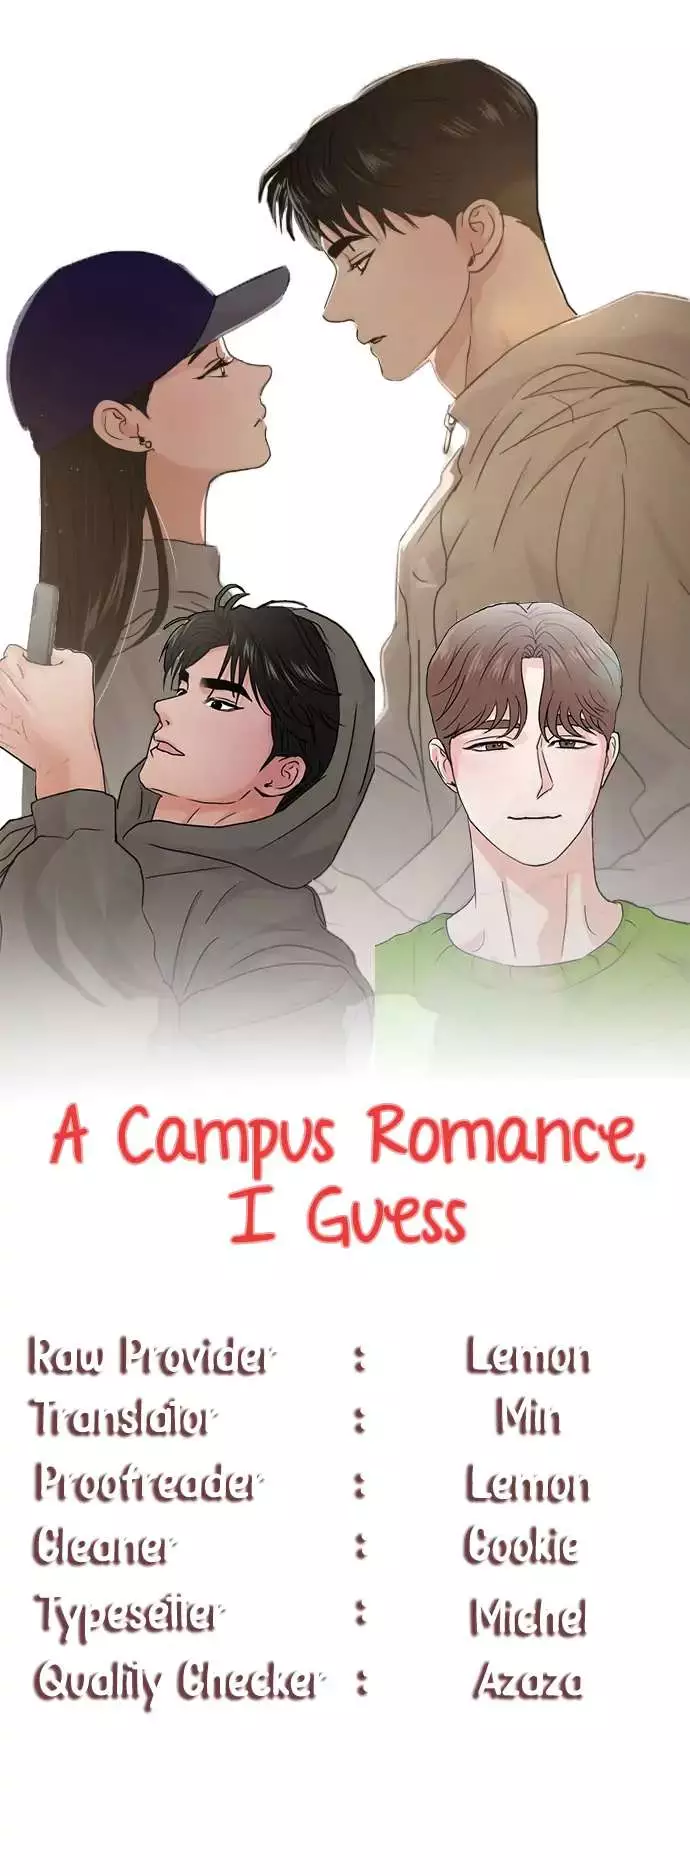 A Campus Romance, I Guess - 5 page 1-08f6a4ab